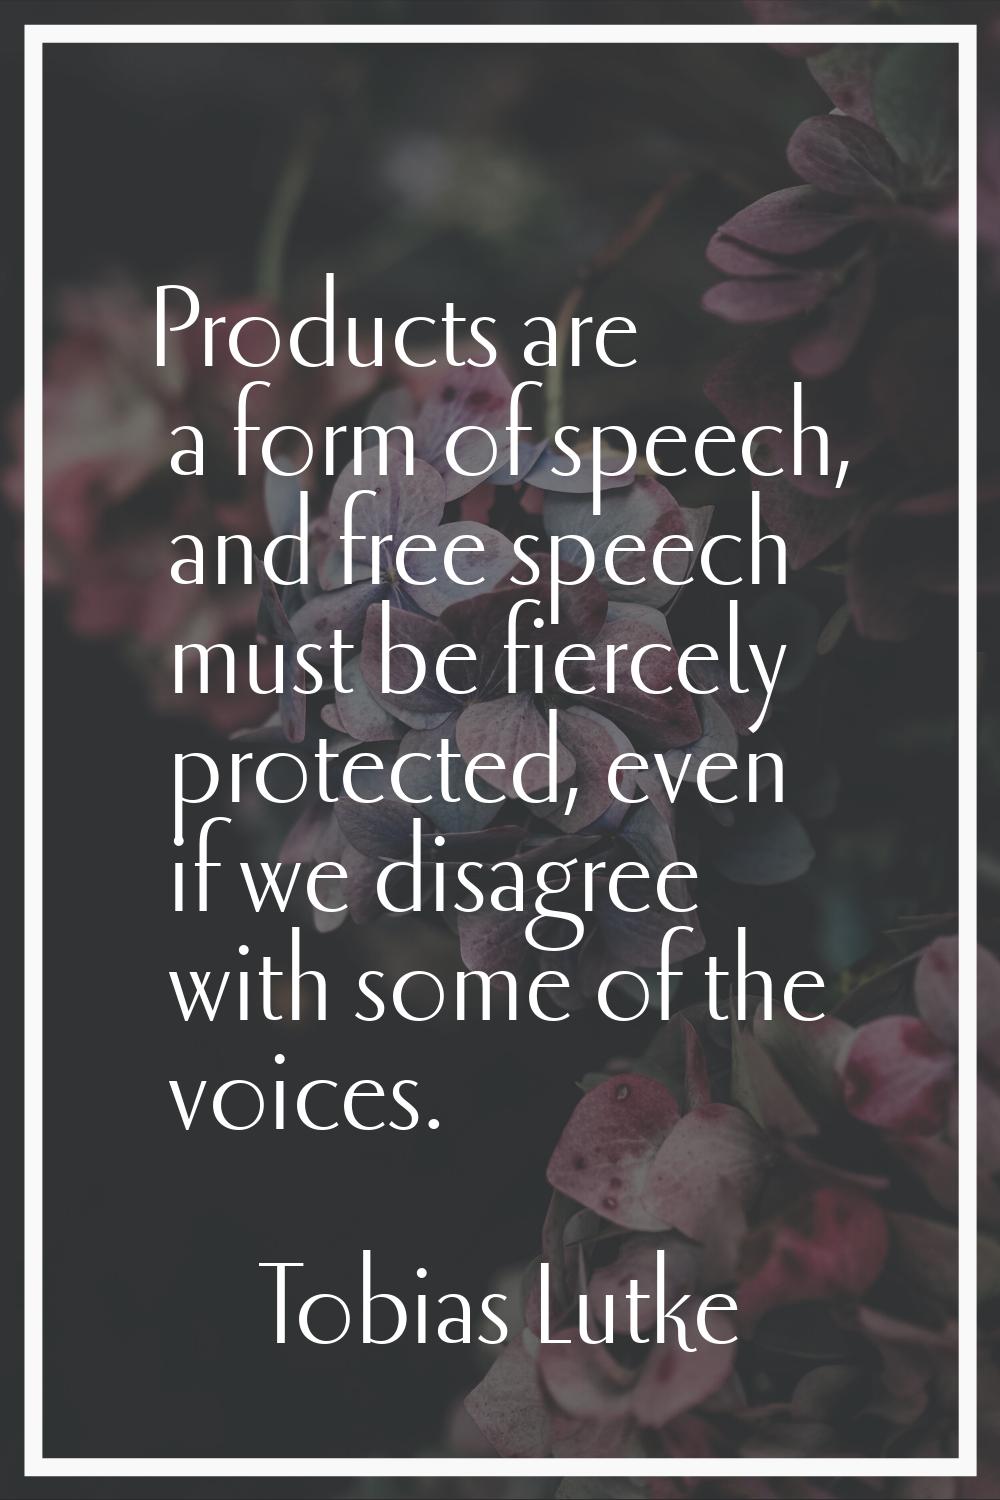 Products are a form of speech, and free speech must be fiercely protected, even if we disagree with